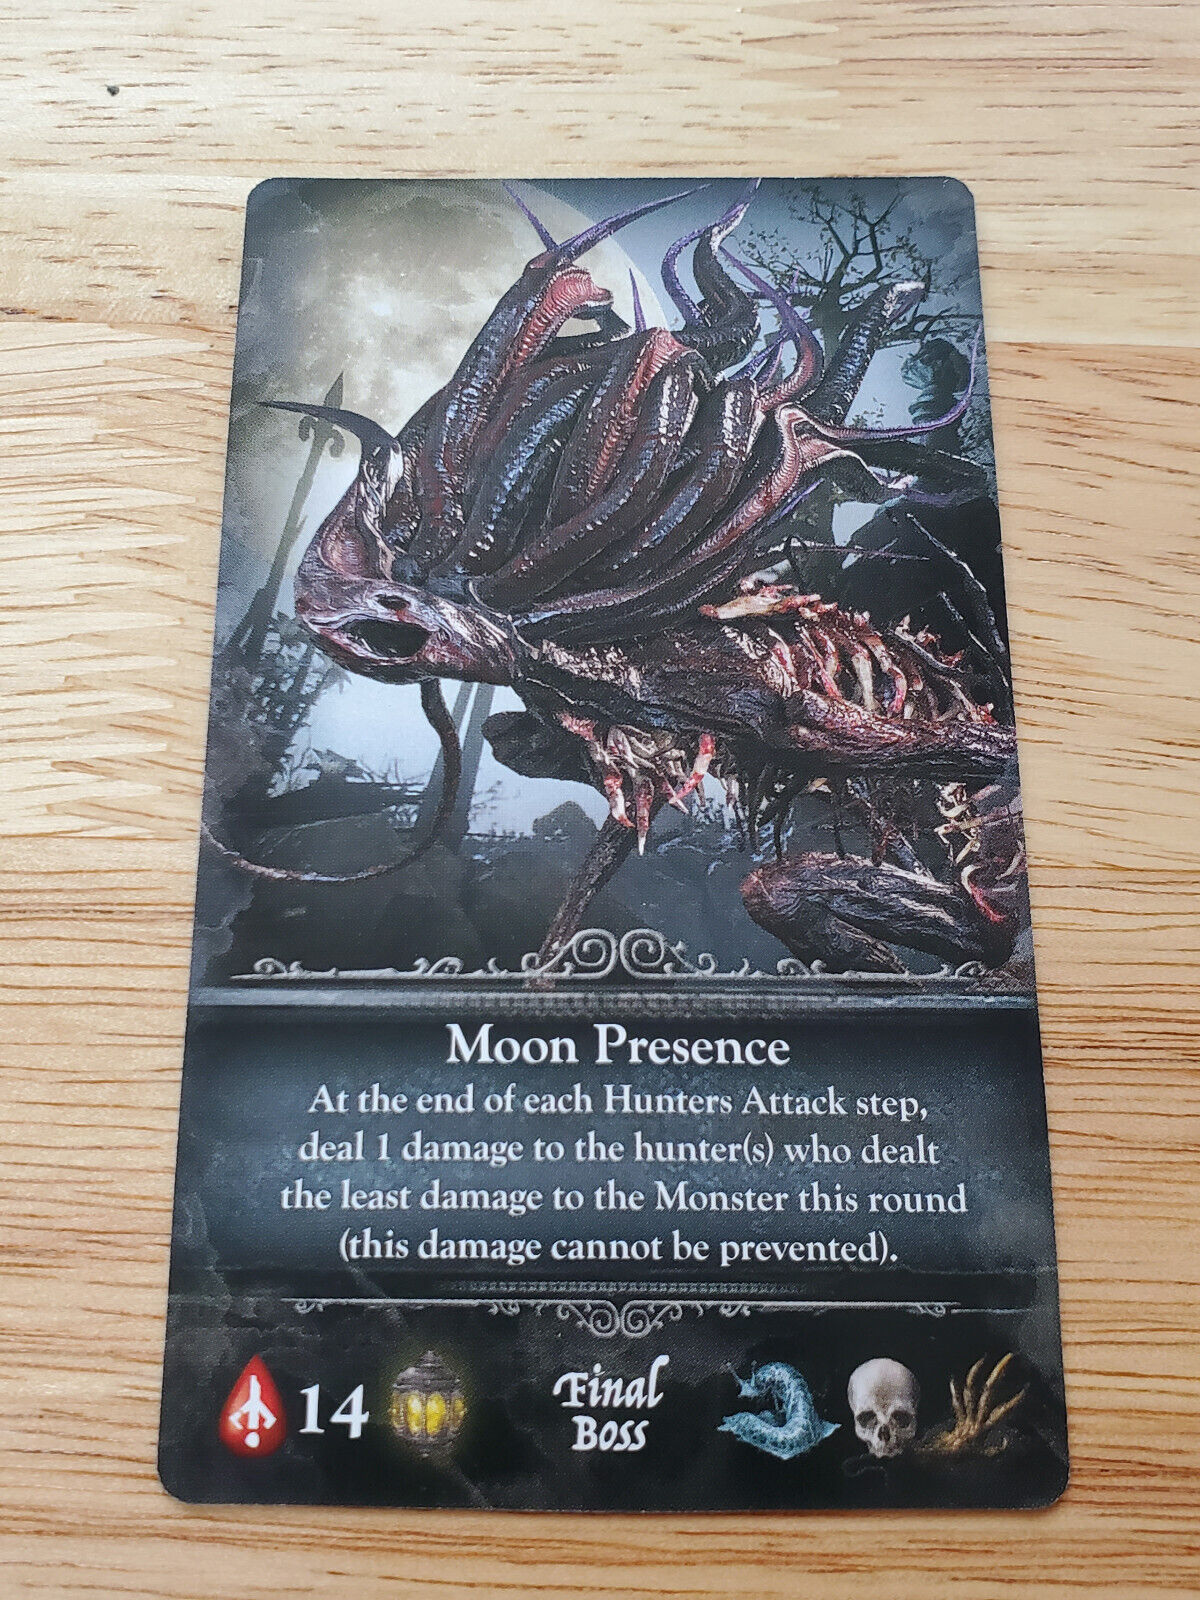 Bloodborne The Card Game Game Night Promo Card - Moon Presence. Sleeved.